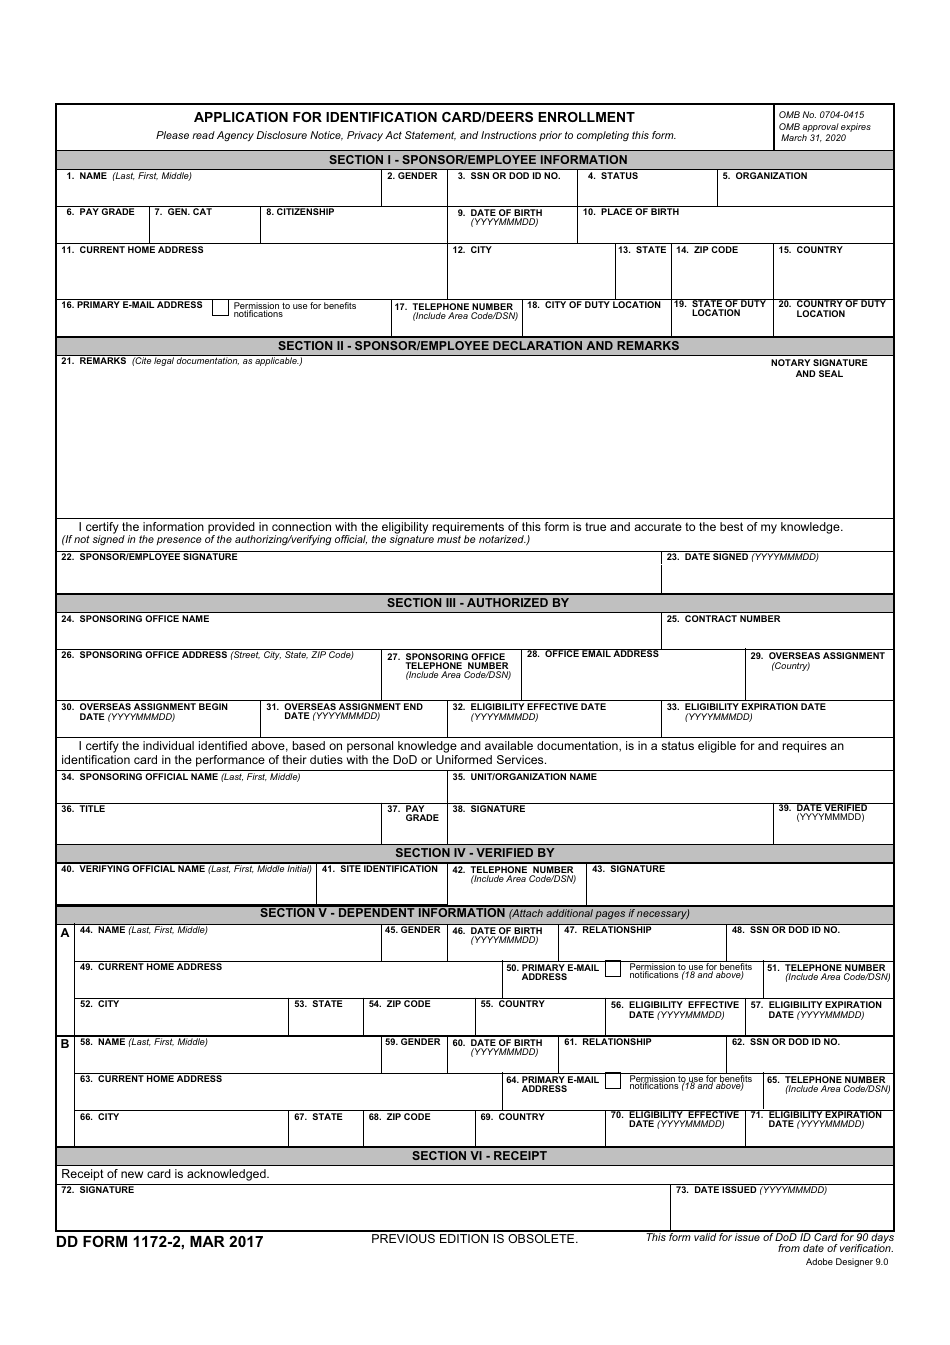 DD Form 1172-2 Application for Identification Card / DEERS Enrollment, Page 1